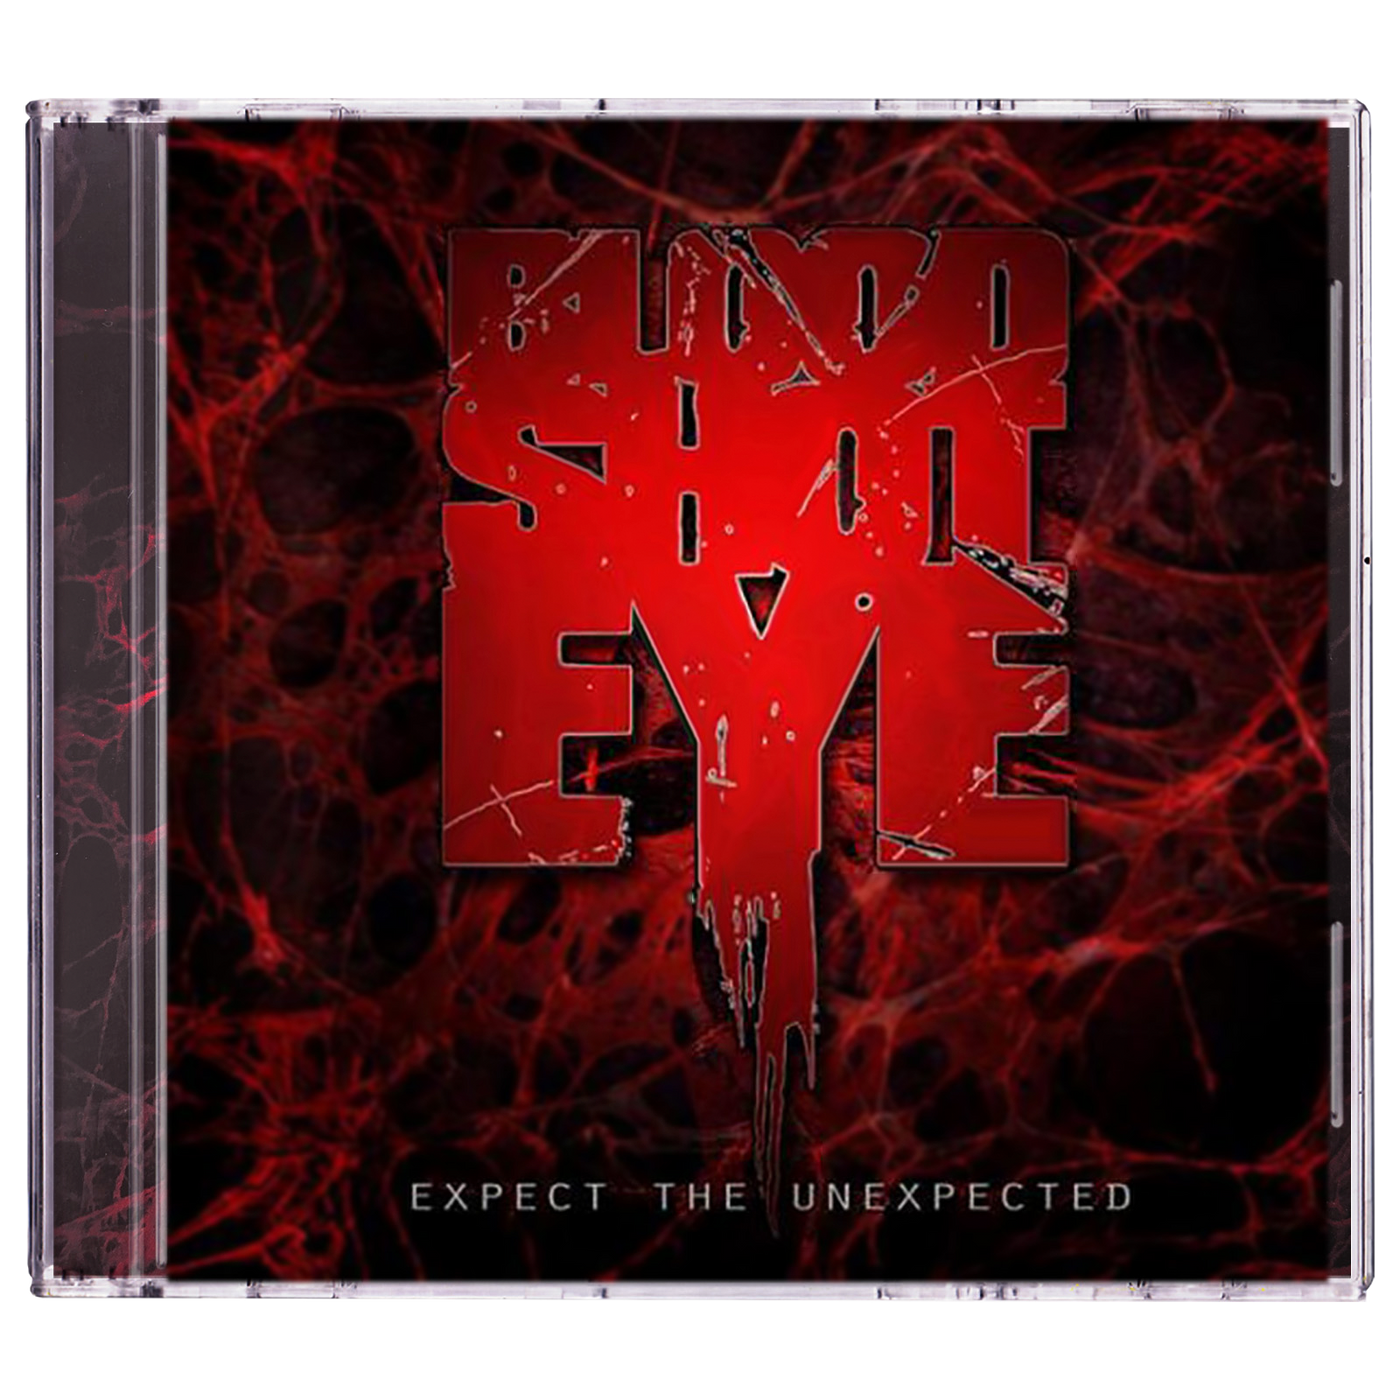 Bloodshoteye 'Except the Unexpected' CD